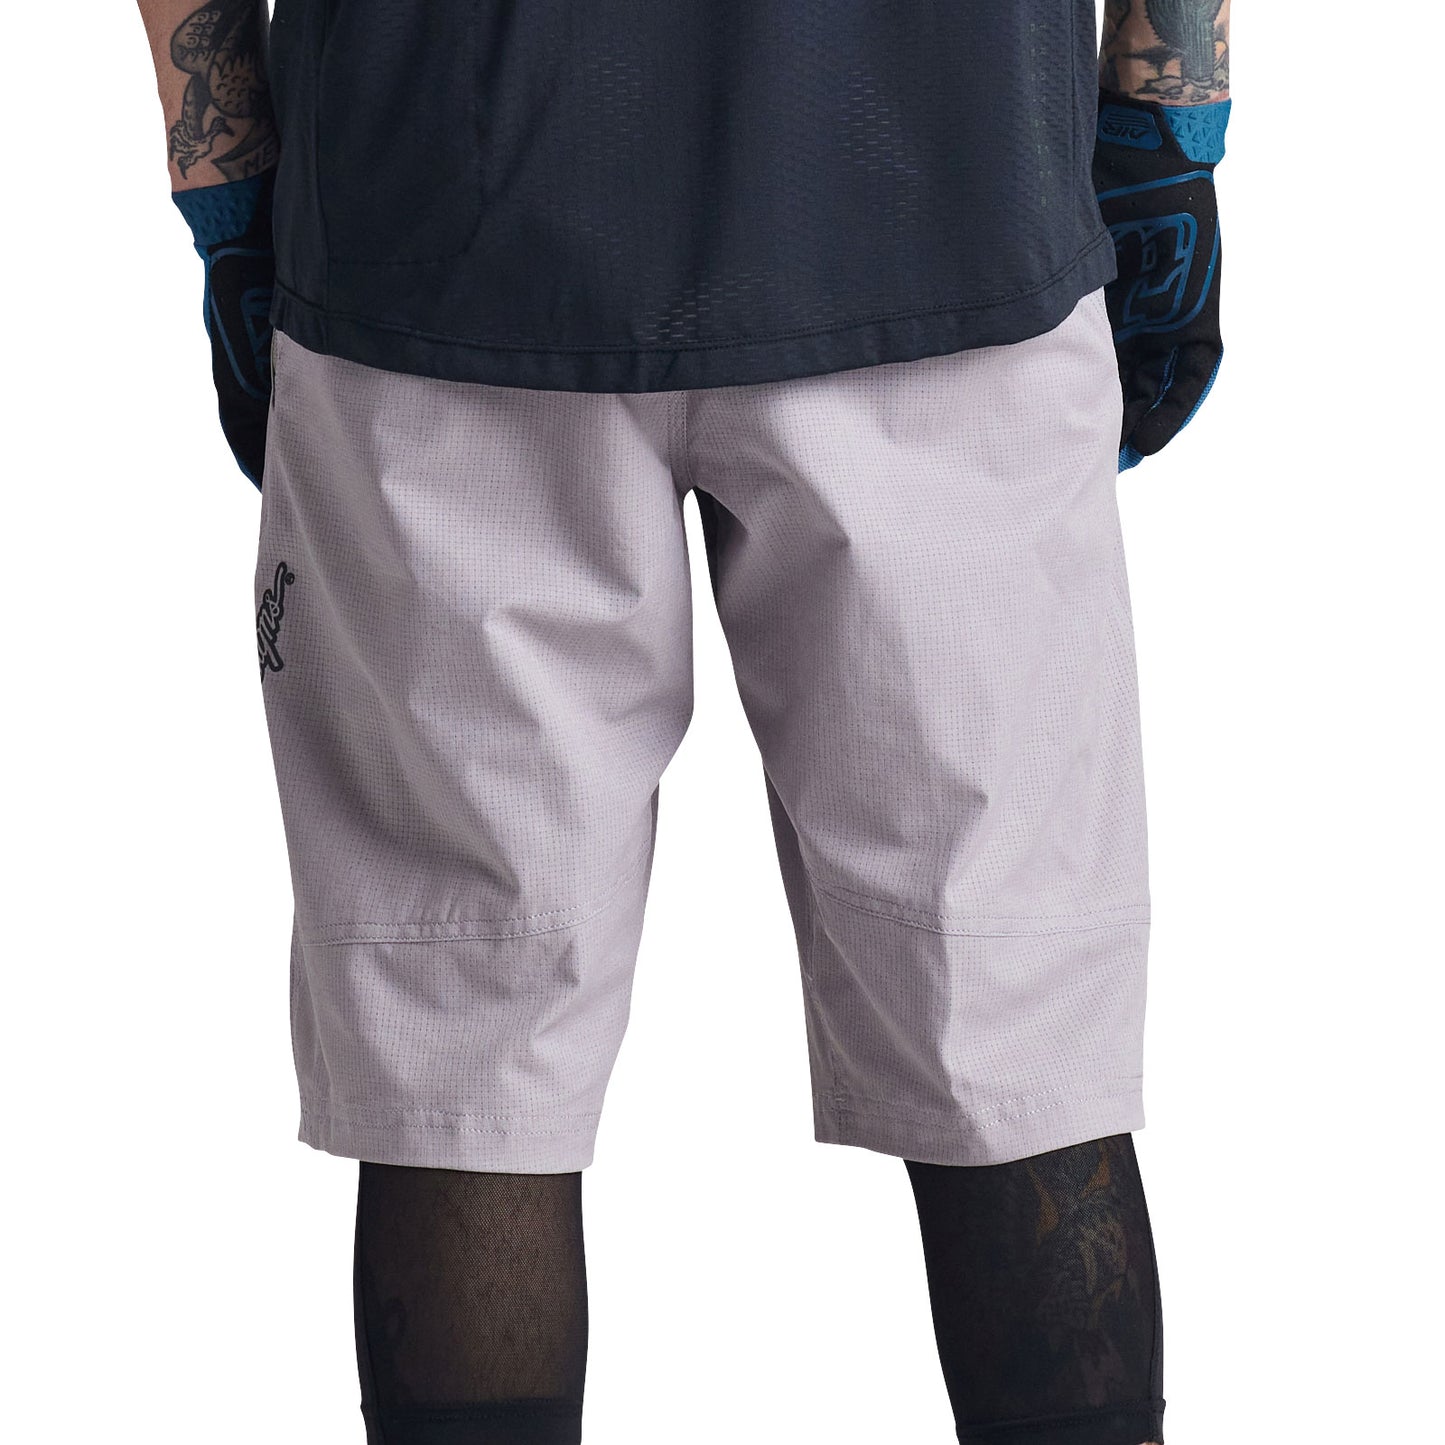 Skyline Air Short W/Liner Mono Charcoal